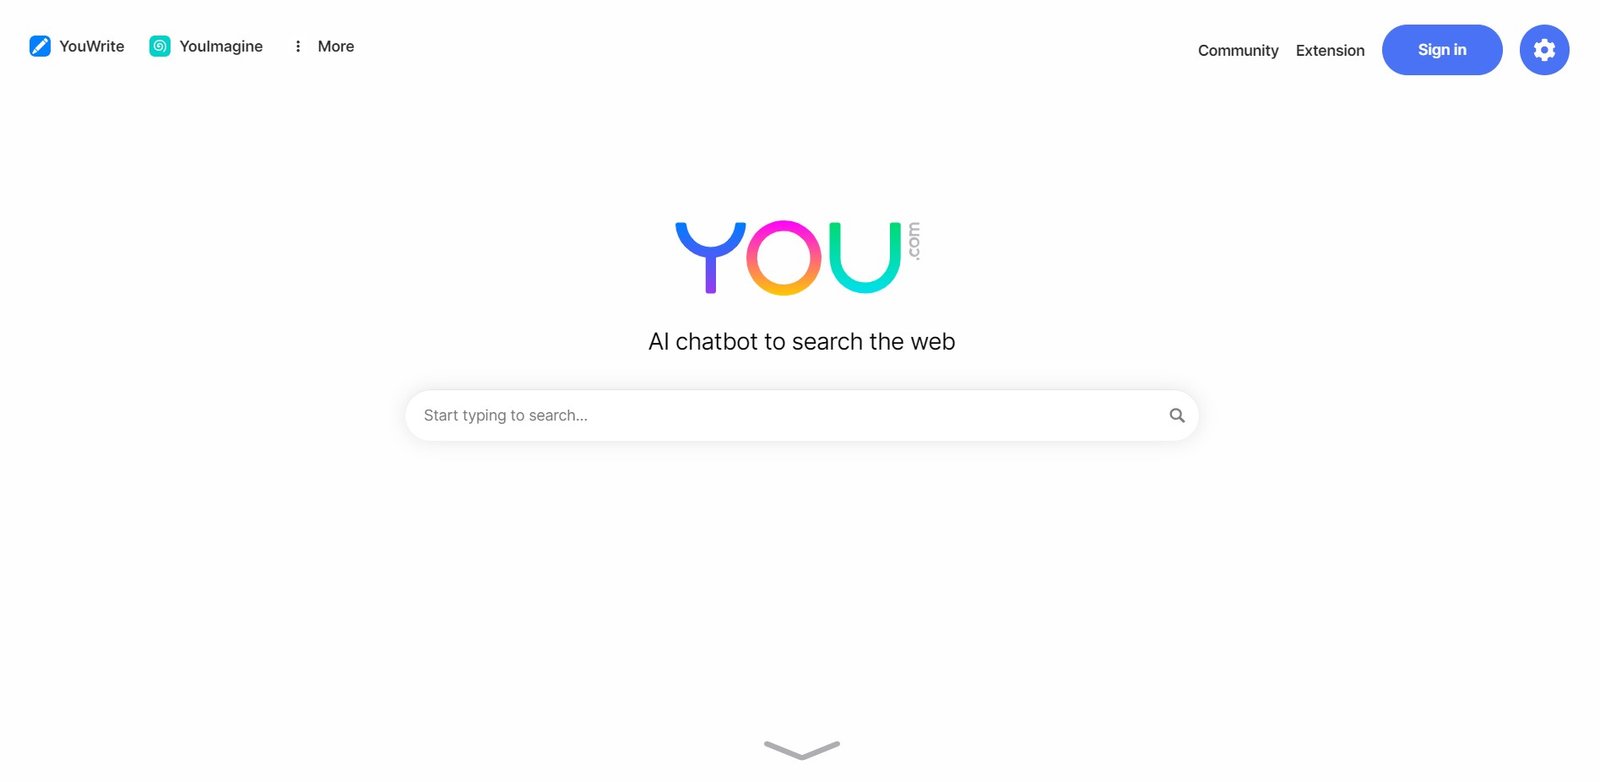 YOU is an AI search engine for a customized search experience while keeping their data 100% private